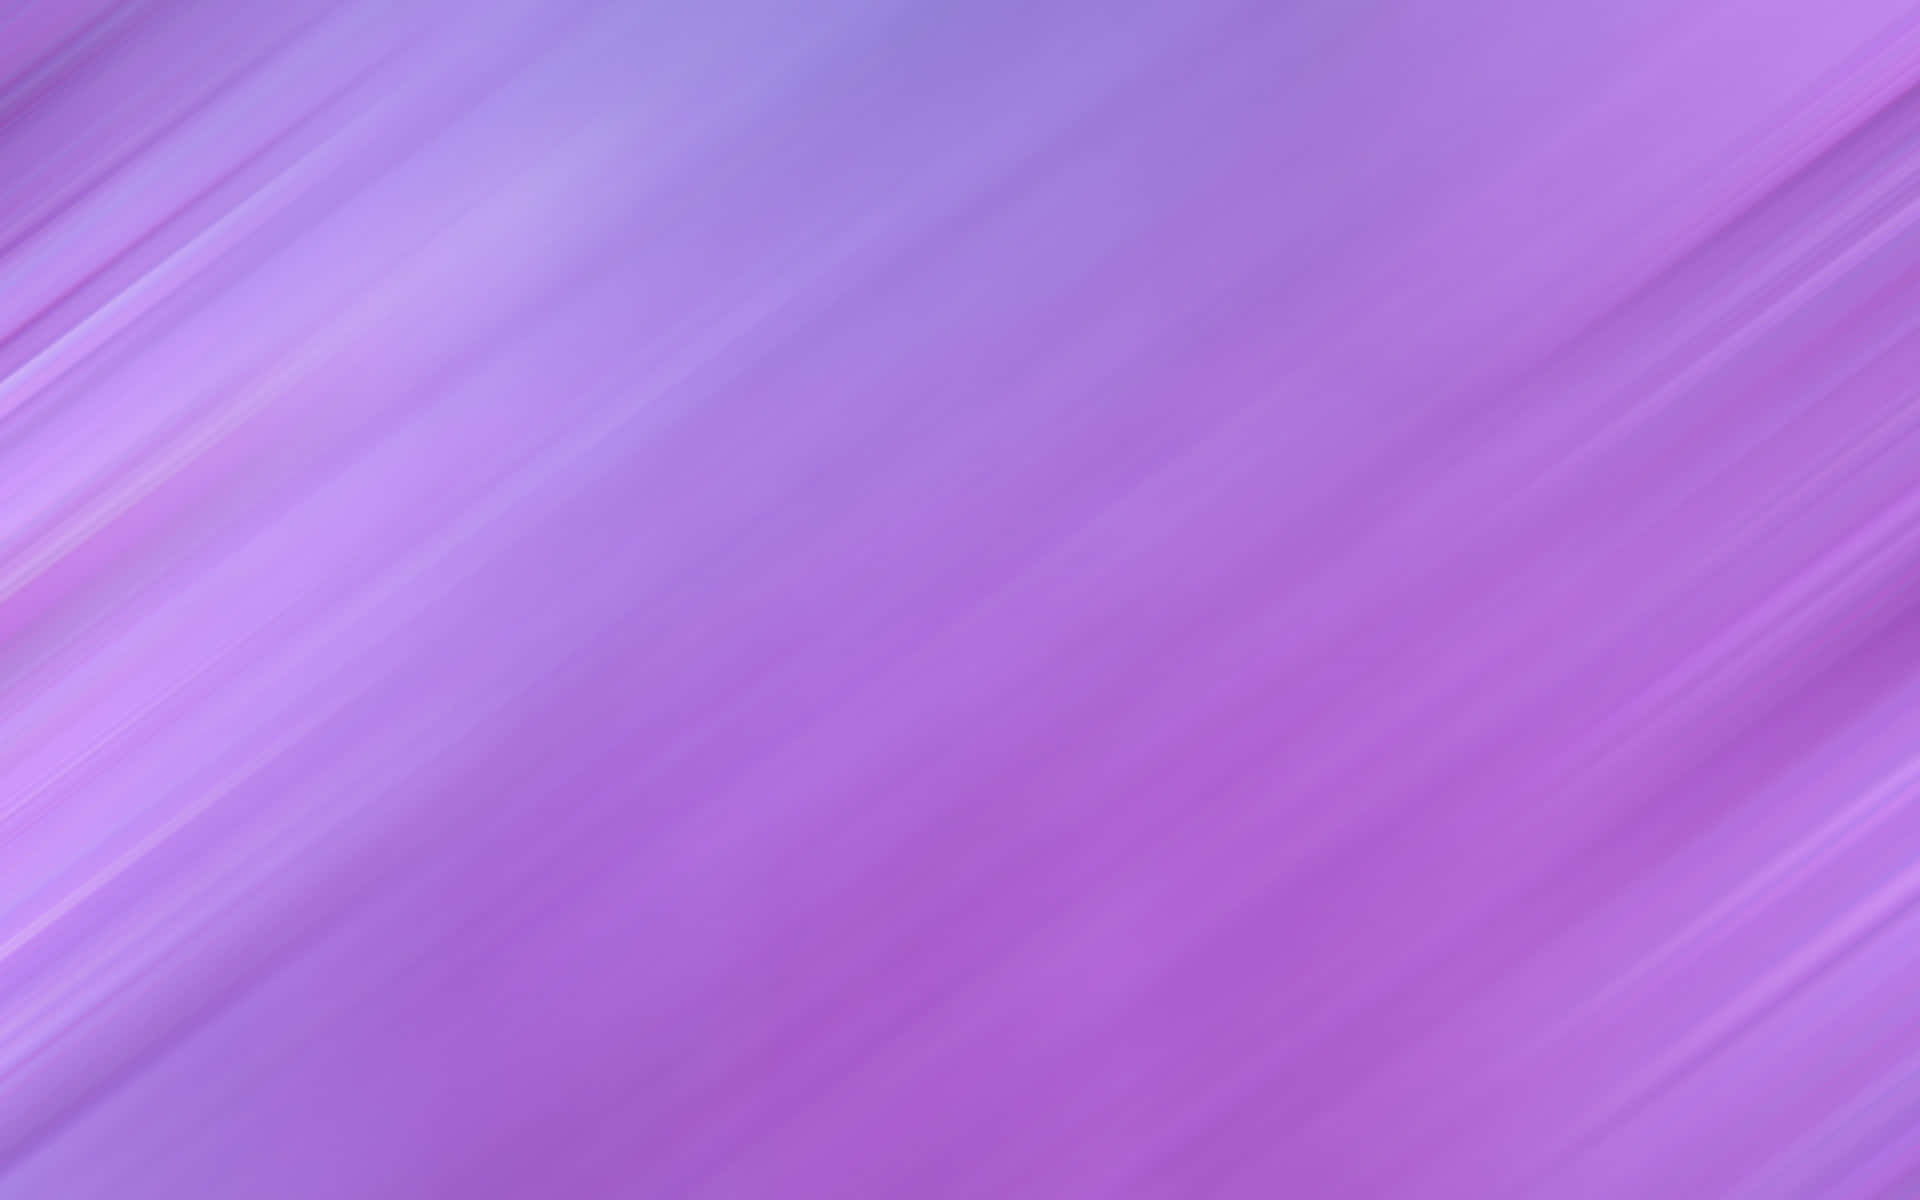 Pure and Solid, Light Purple Colouring Wallpaper